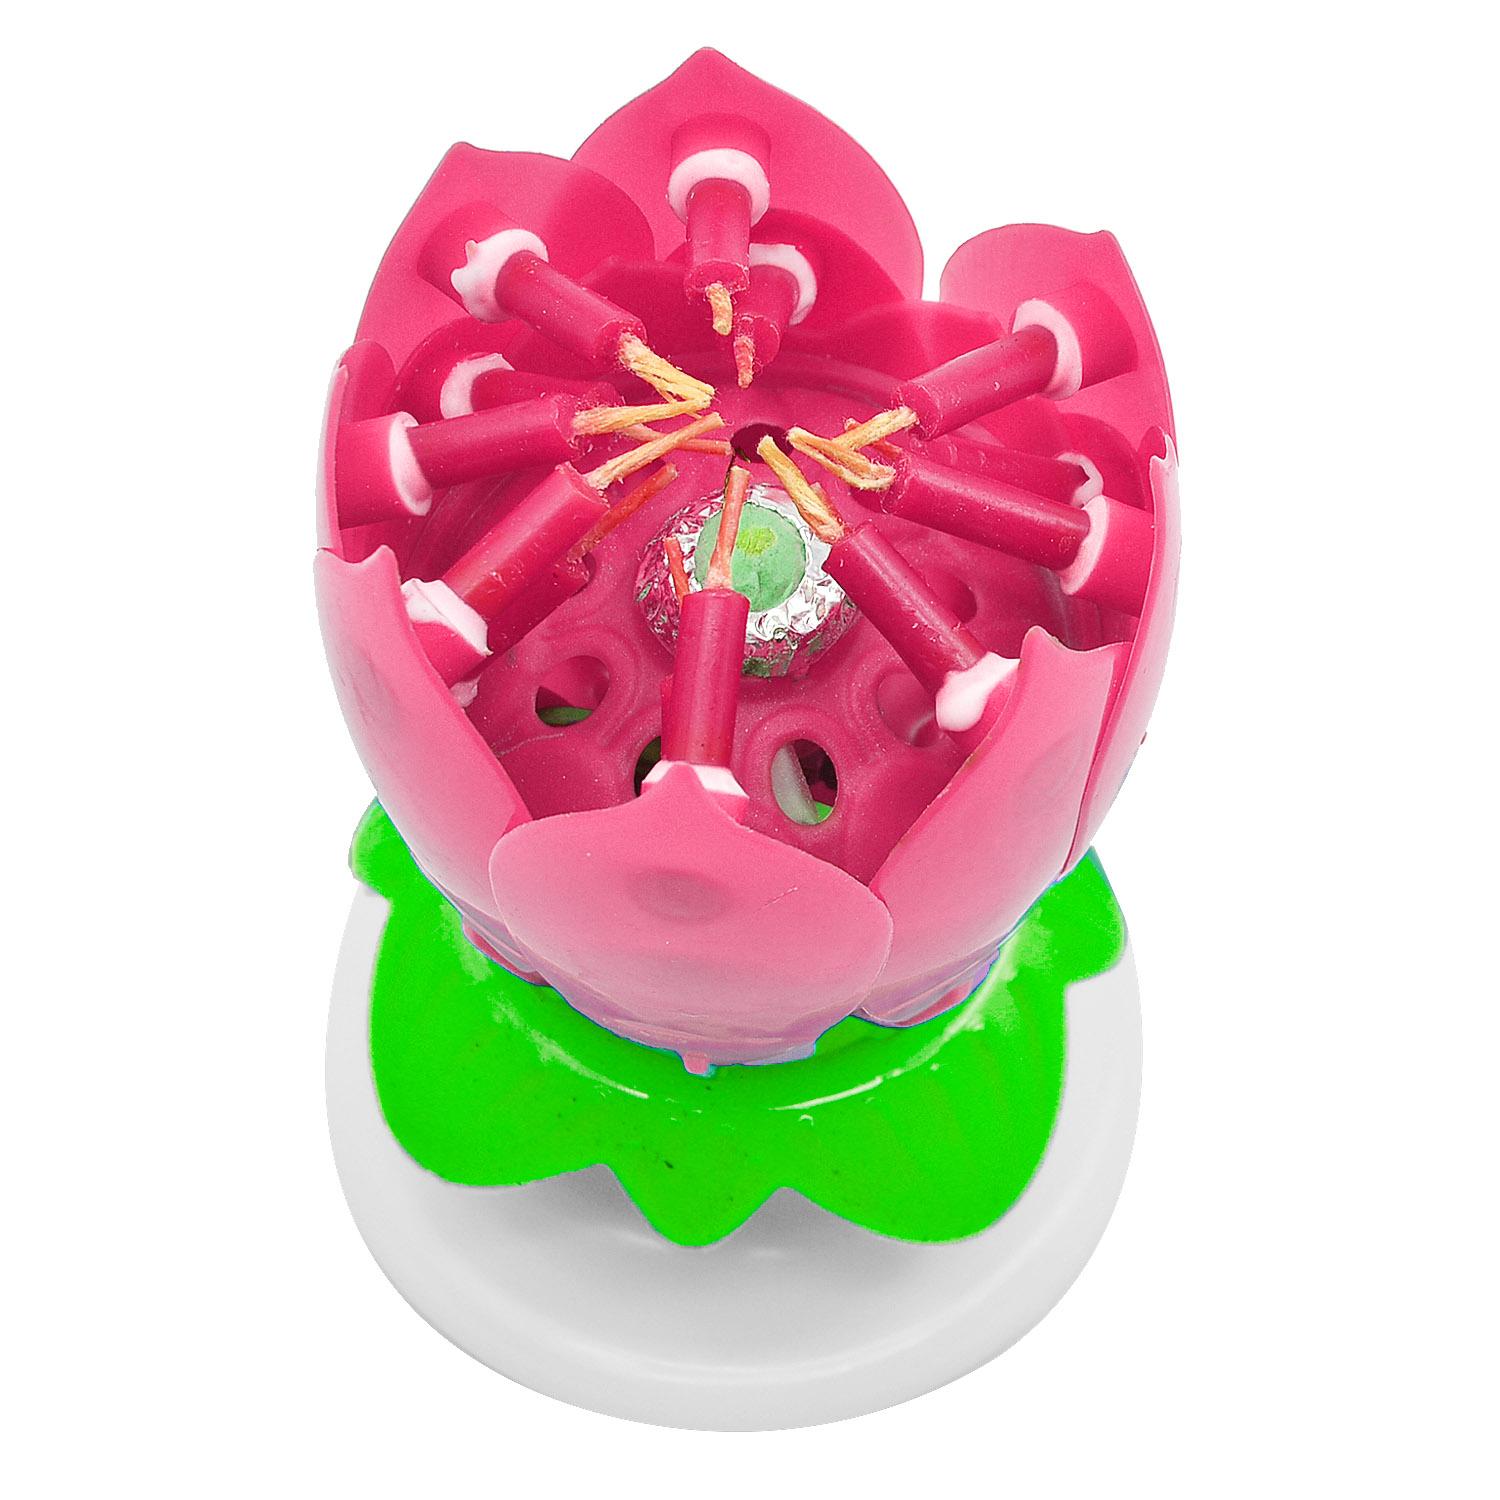 Flower Shaped 2-Layer 14-Candle Birthday Electric Music Paraffin Candle Flaming Flower Candle Pink - intl